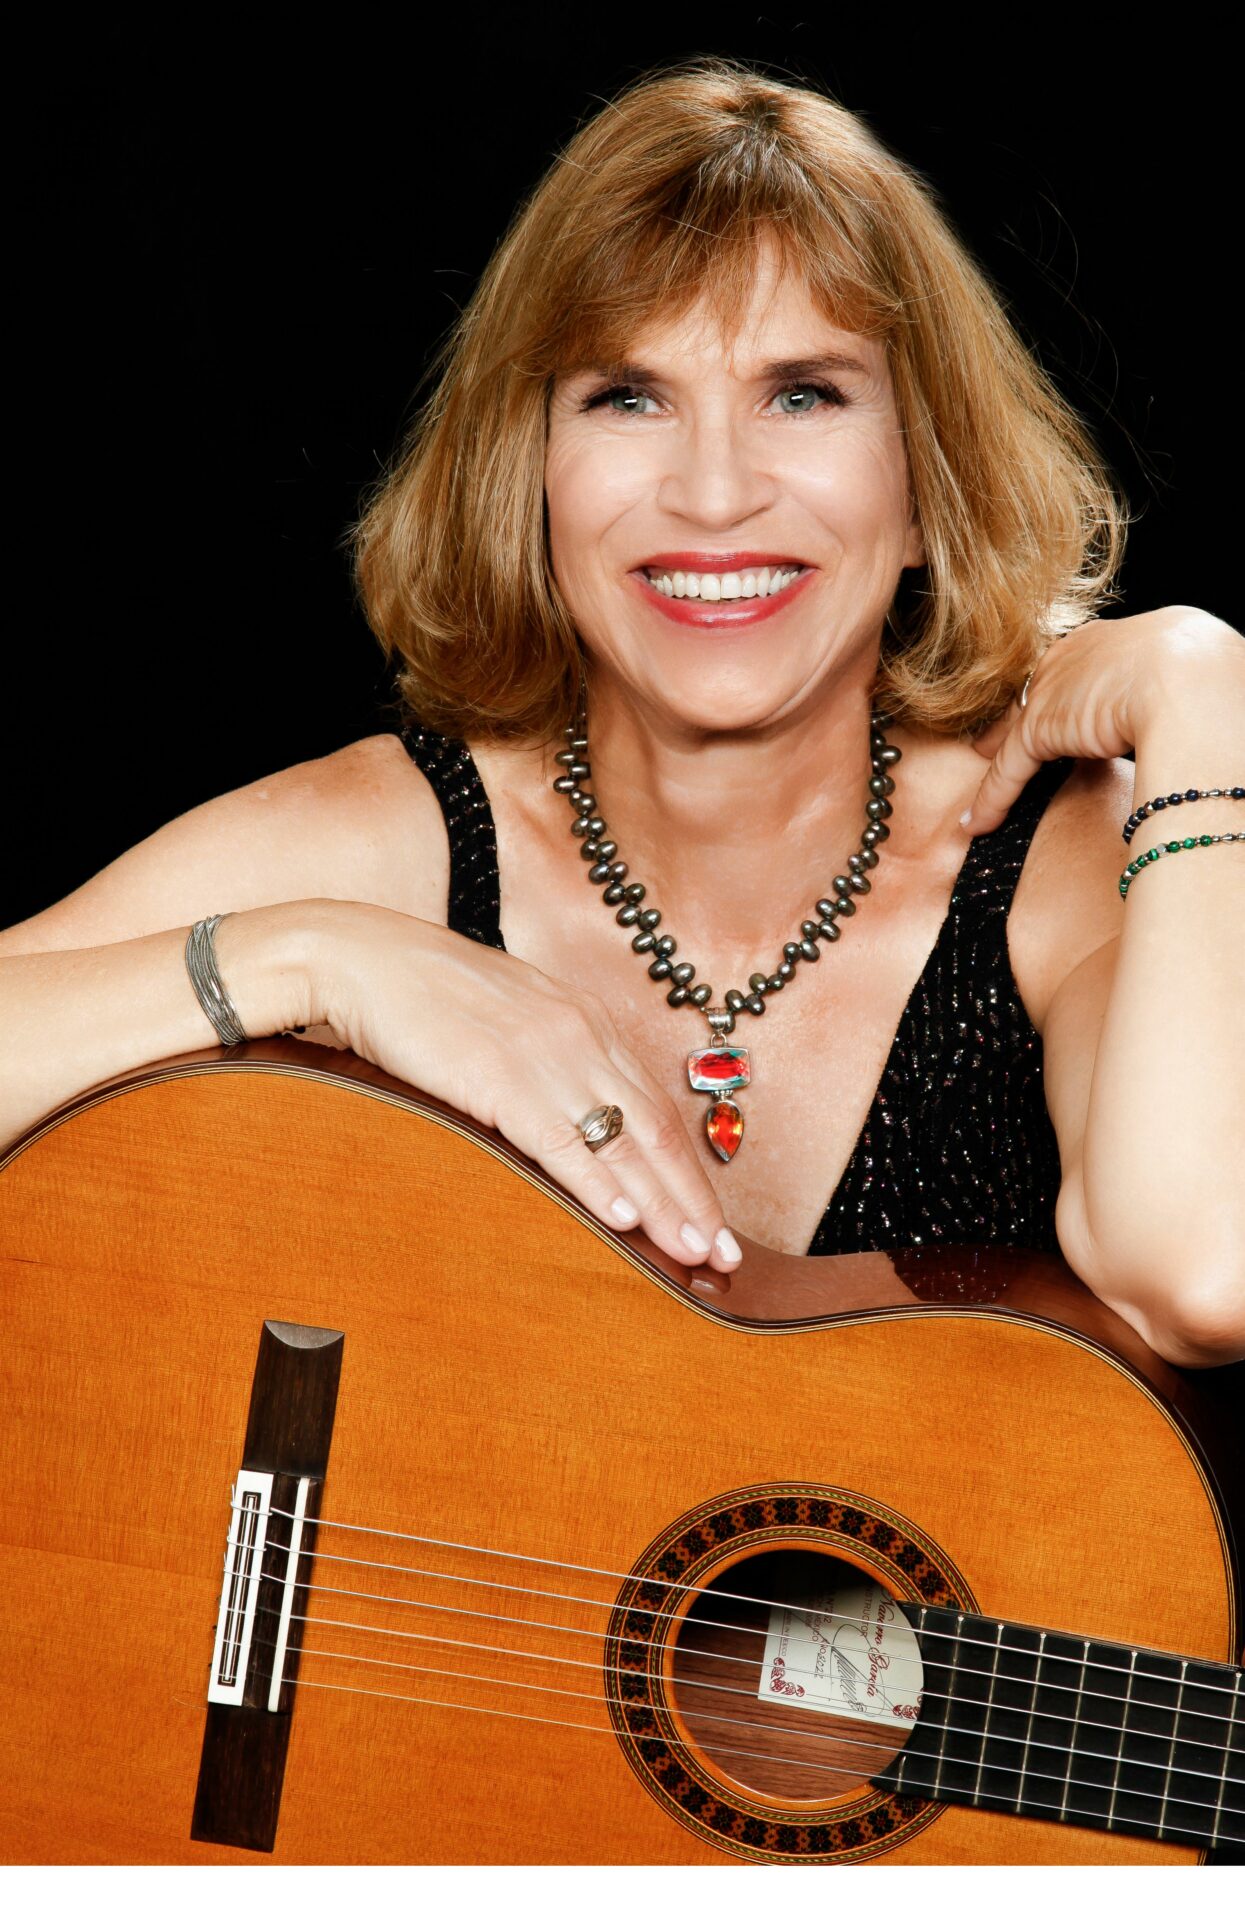 A woman posing with an acoustic guitar.